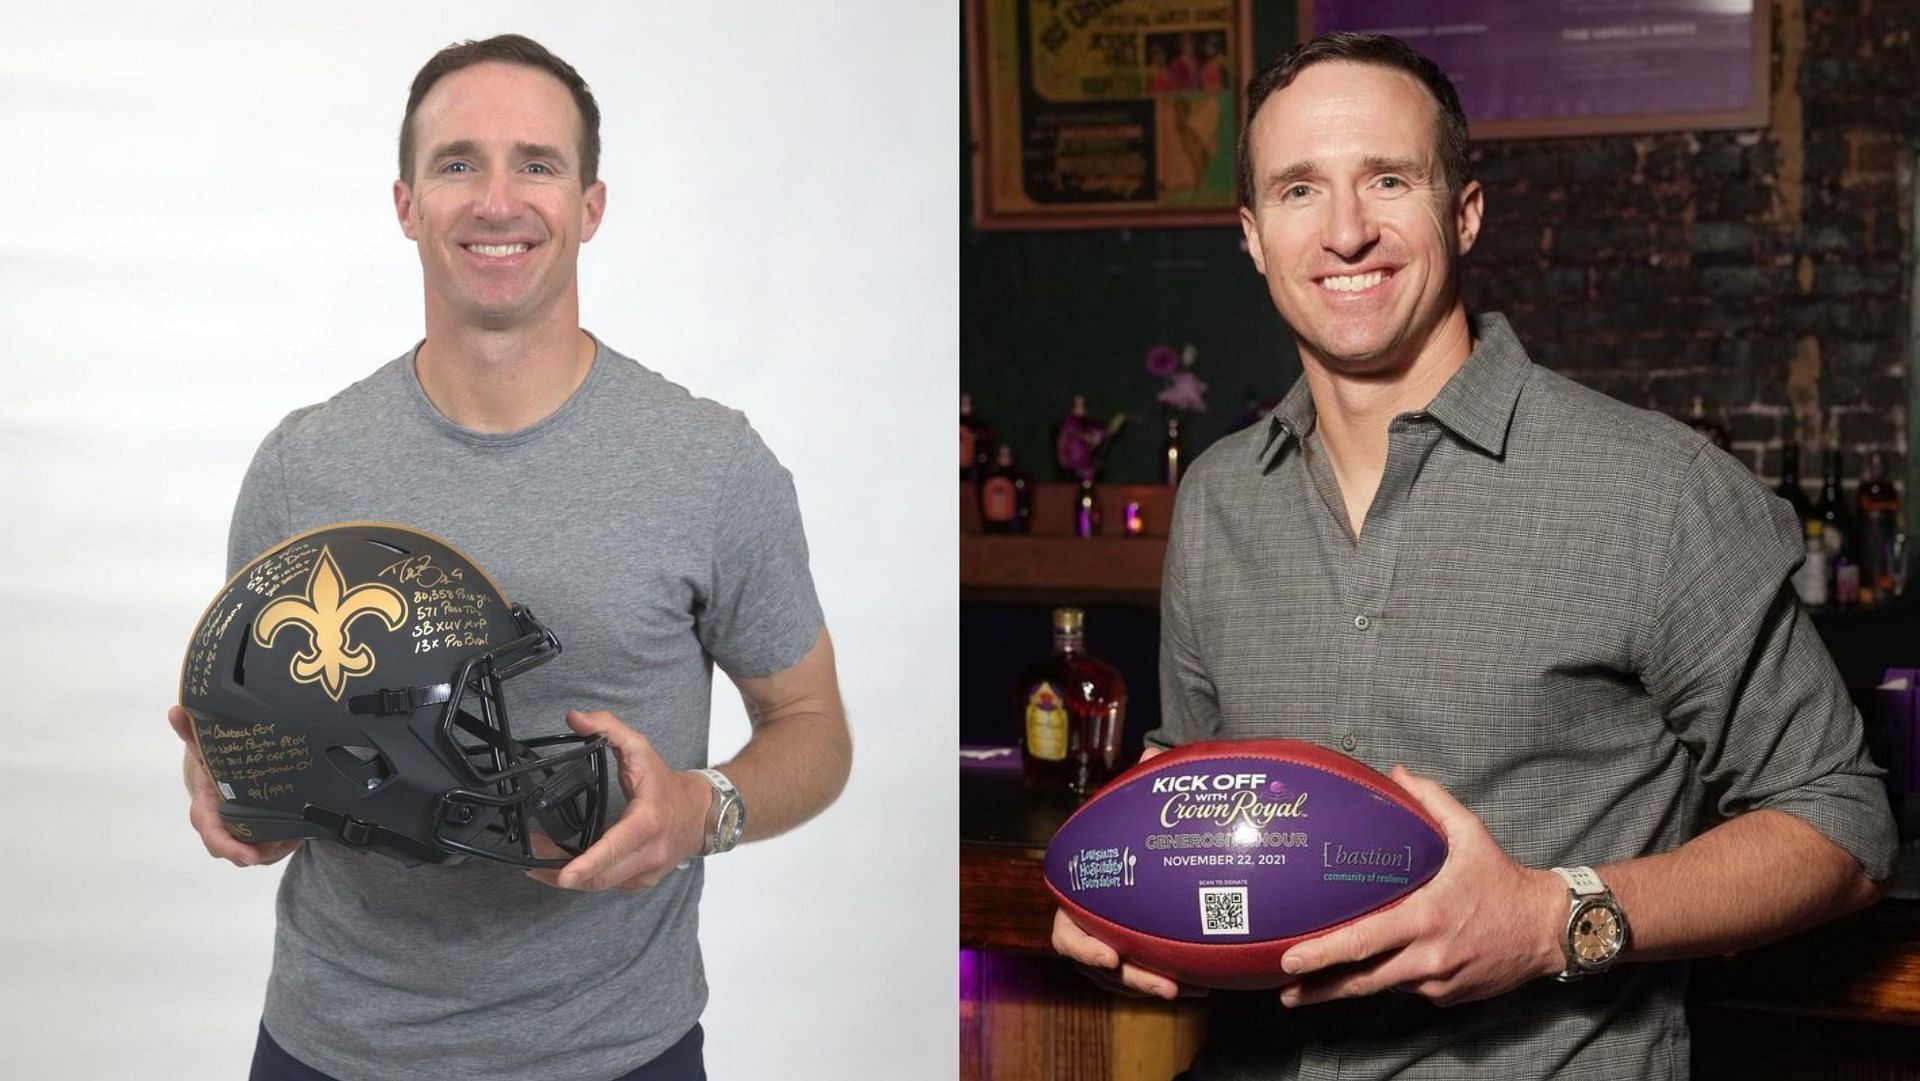 Drew Brees is one of the legends of the NFL (Image via Instagram)